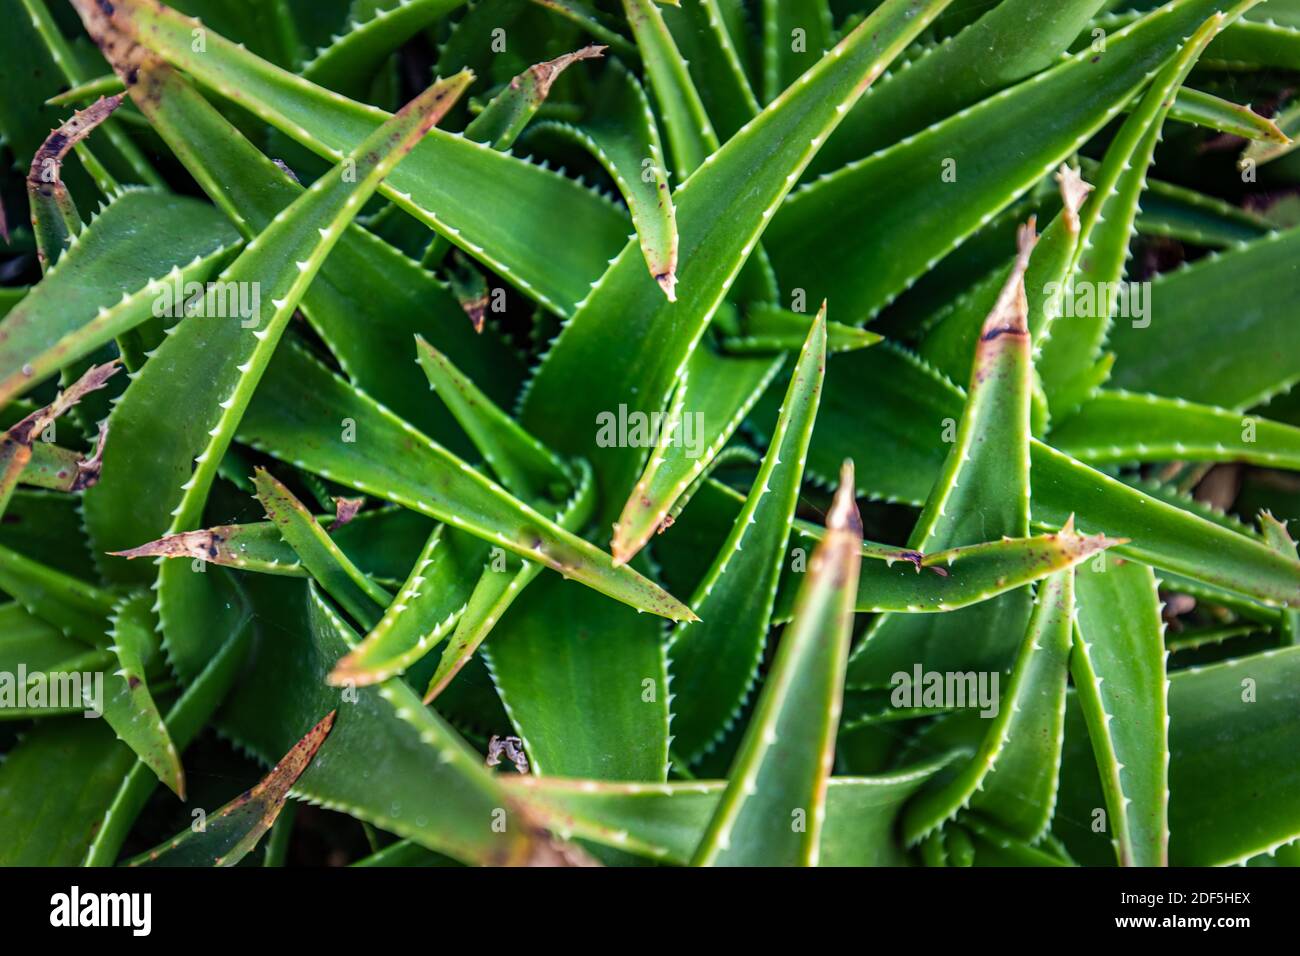 Closeup agave cactus, abstract natural pattern background and textures. Sharp pointed agave plant leaves bunched together. Stock Photo